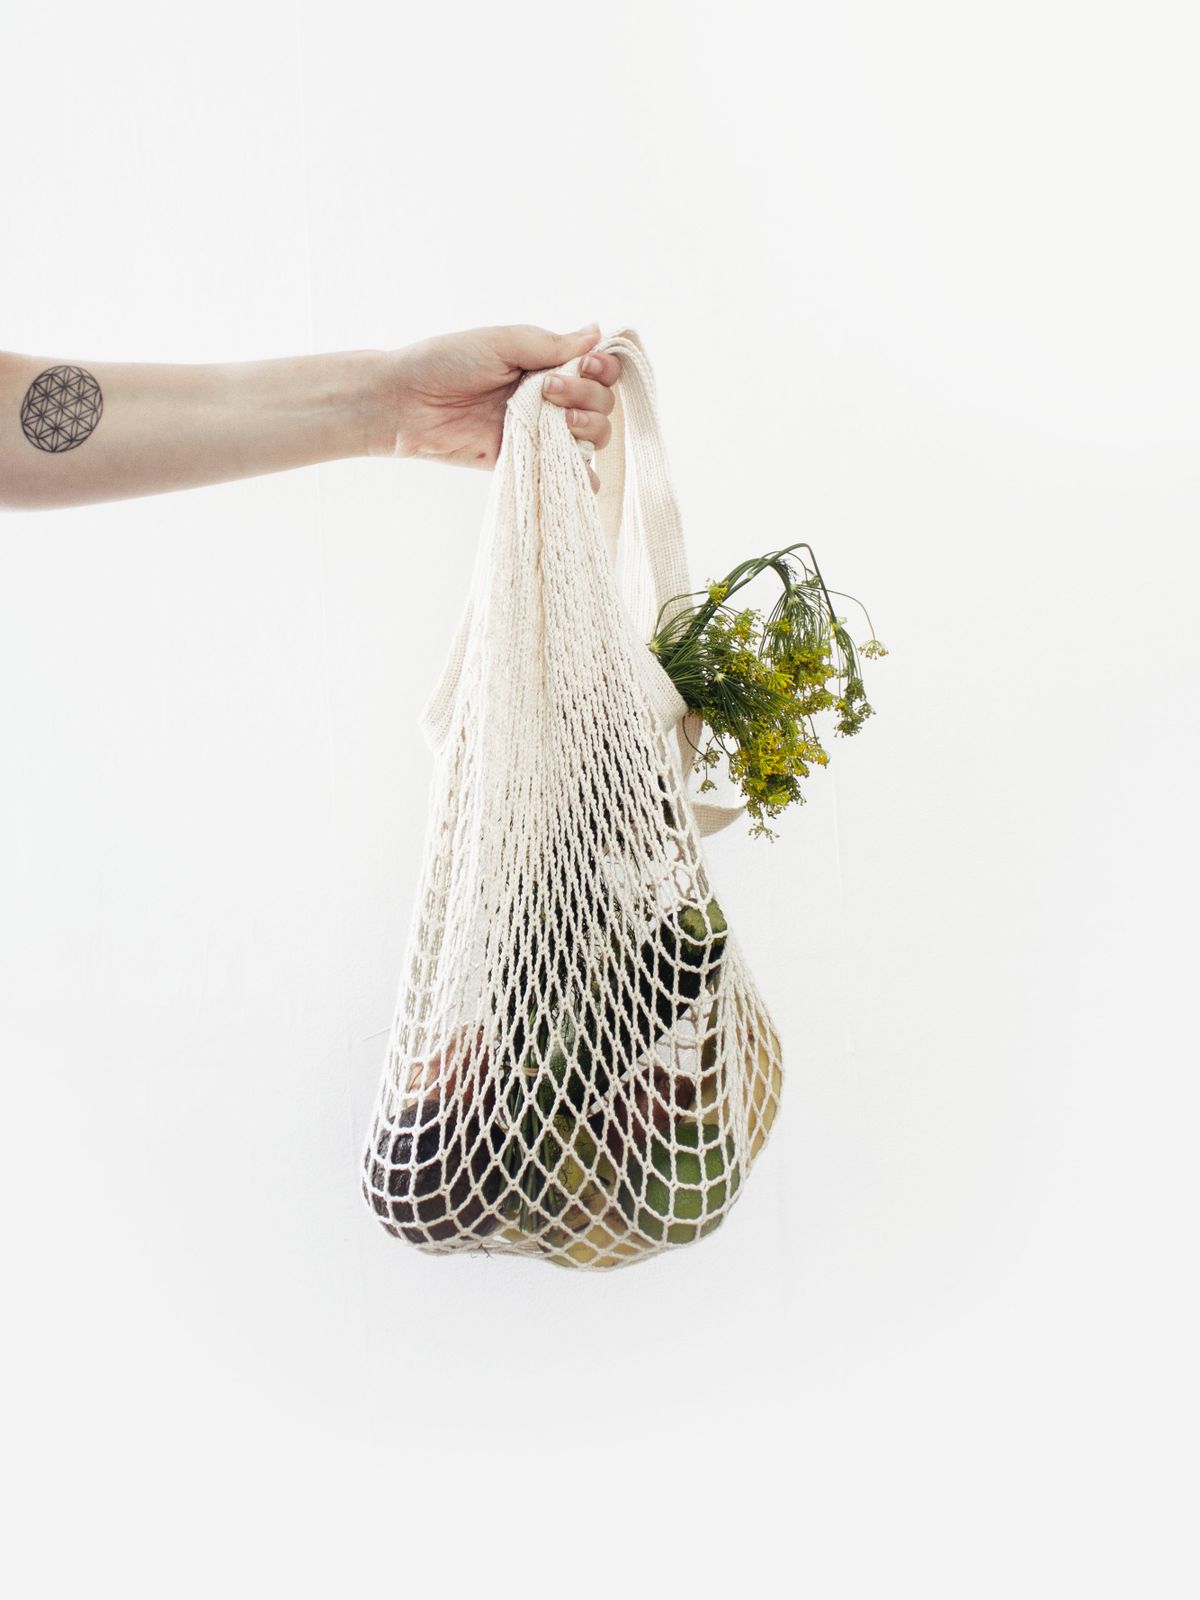 photo of fresh groceries in a bag